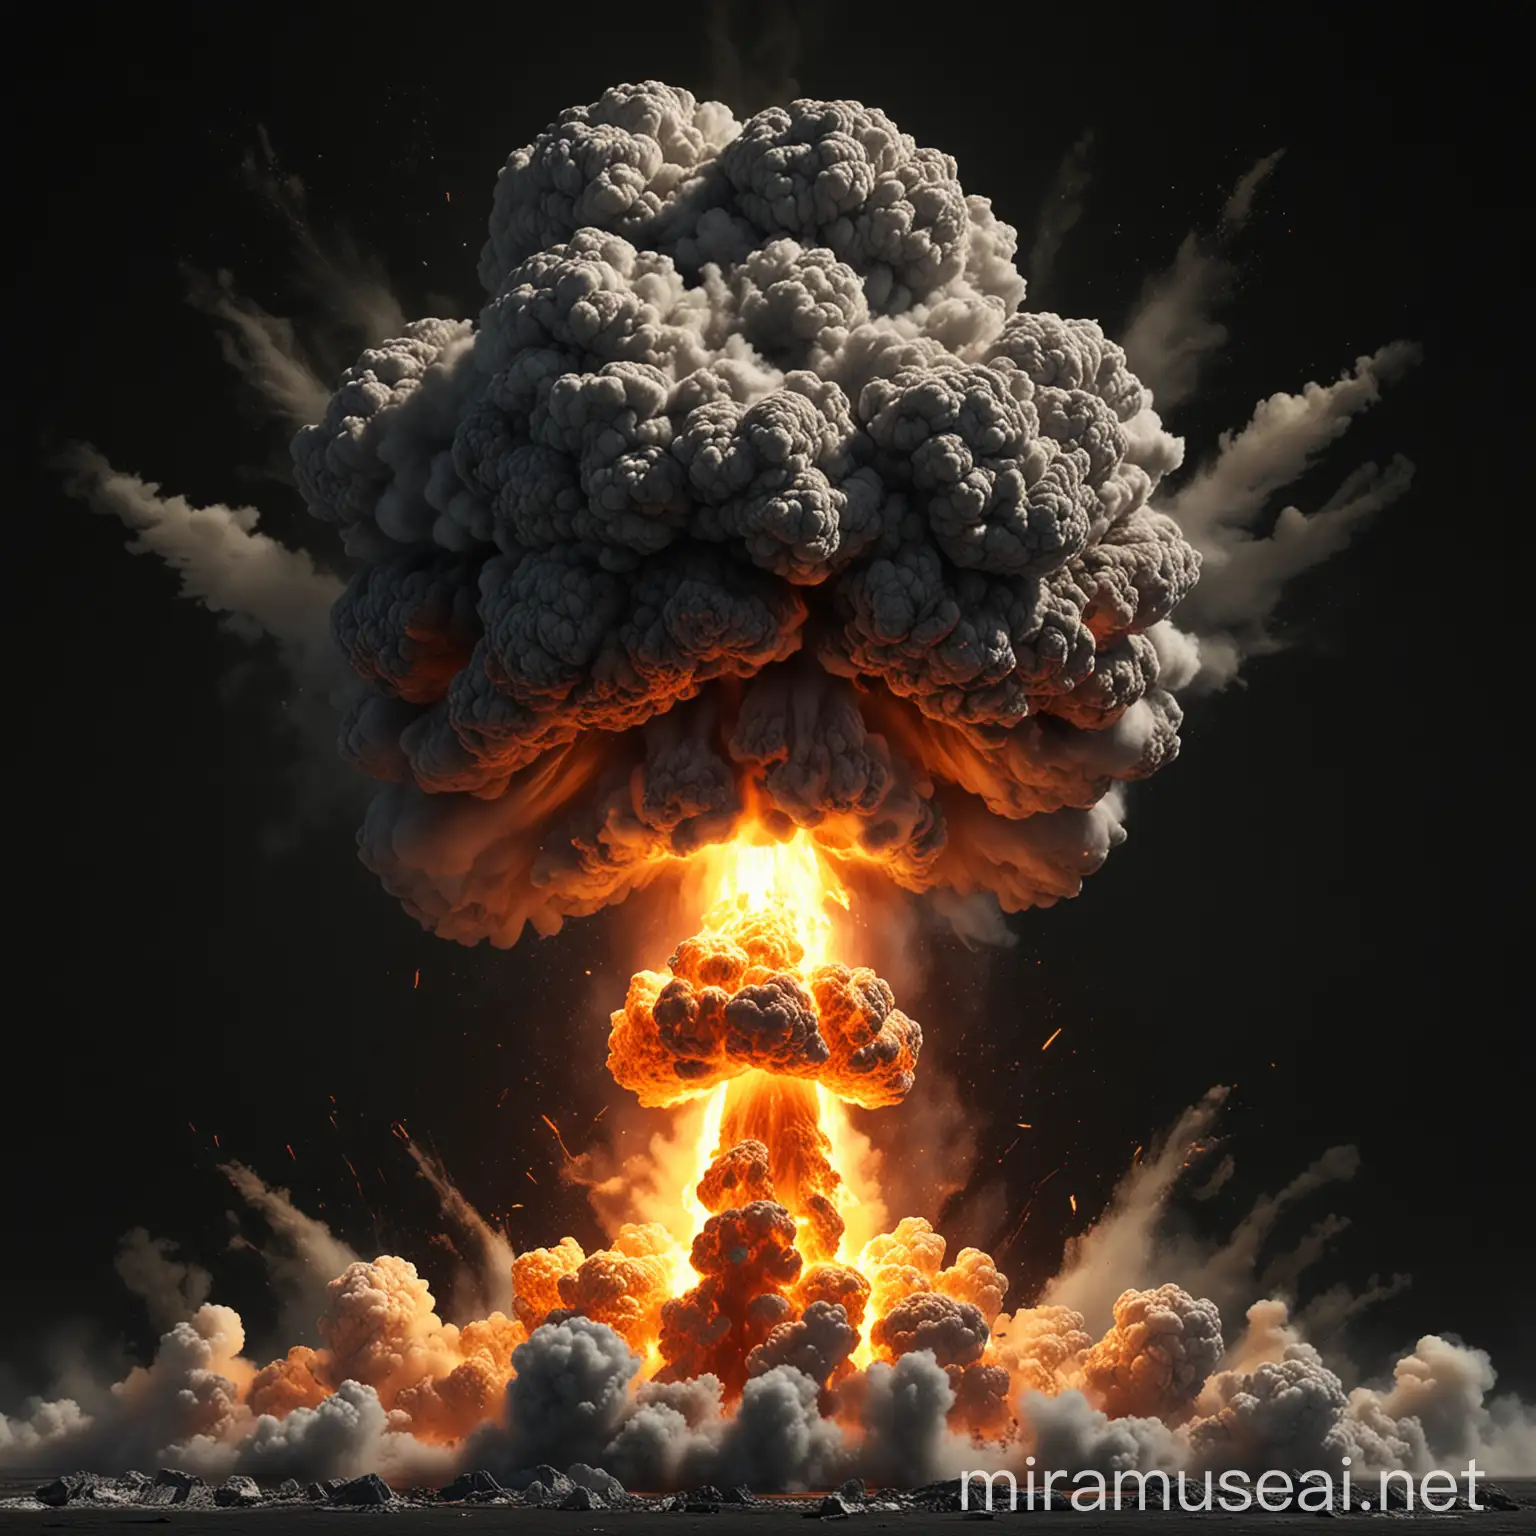 Intense Nuclear Explosion with Fire and Smoke on Black Background